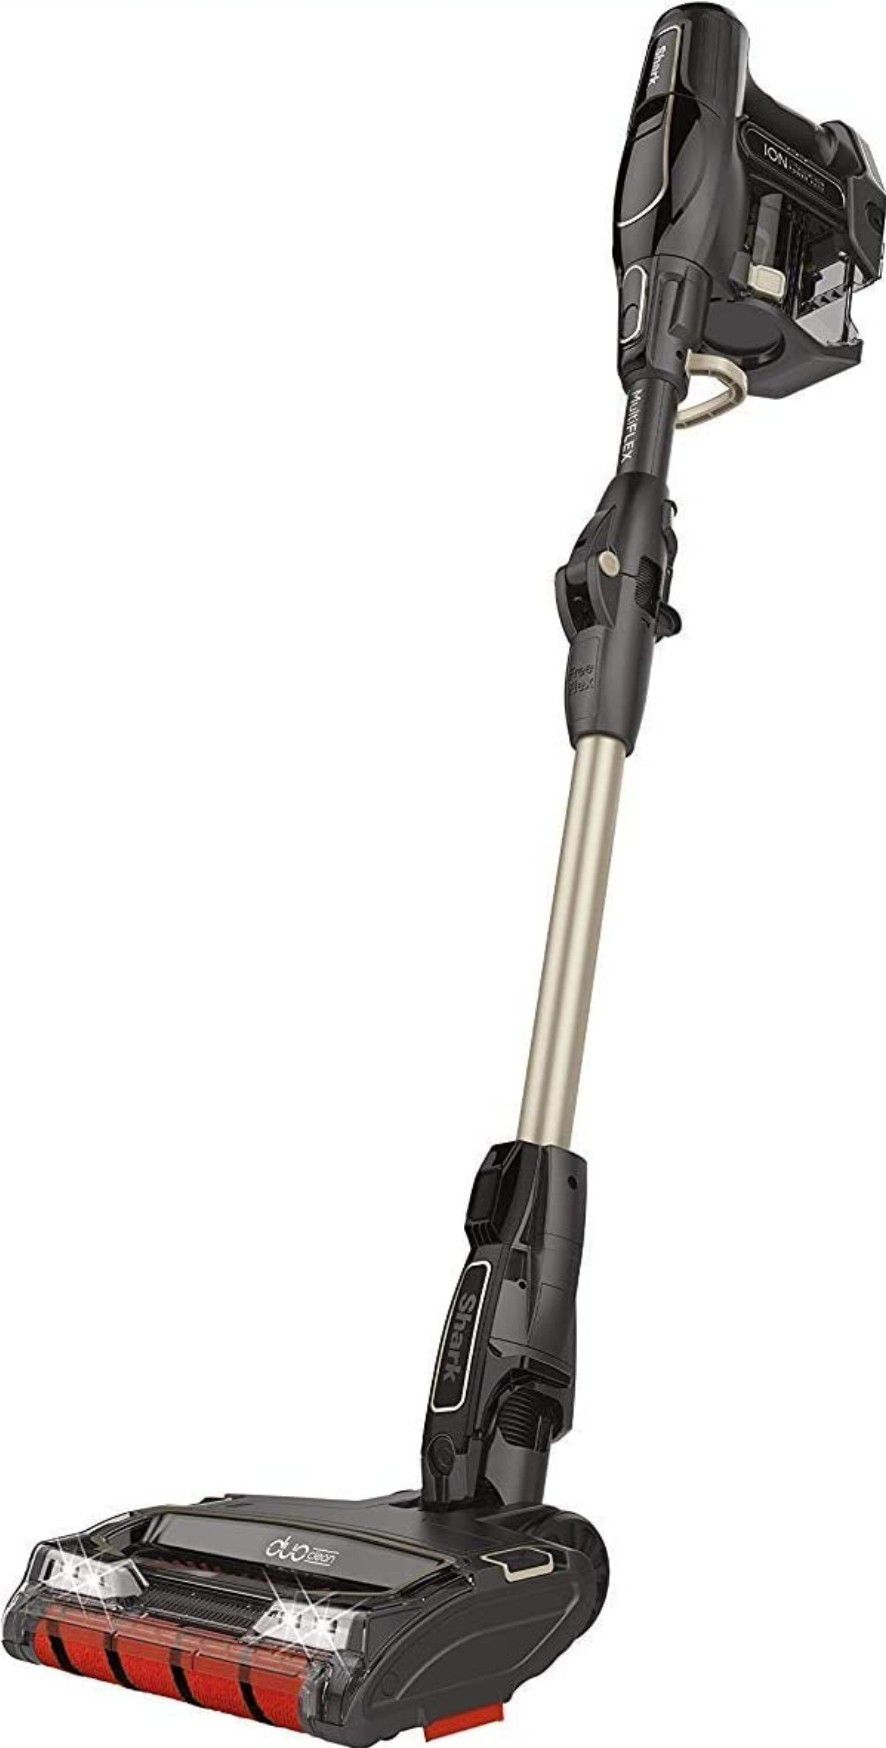 Shark ION F80 Lightweight Cordless Stick Vacuum with MultiFLEX, DuoClean for Carpet & Hardfloor, Hand Vacuum Mode, and (2) Removable Batteries (IF282)